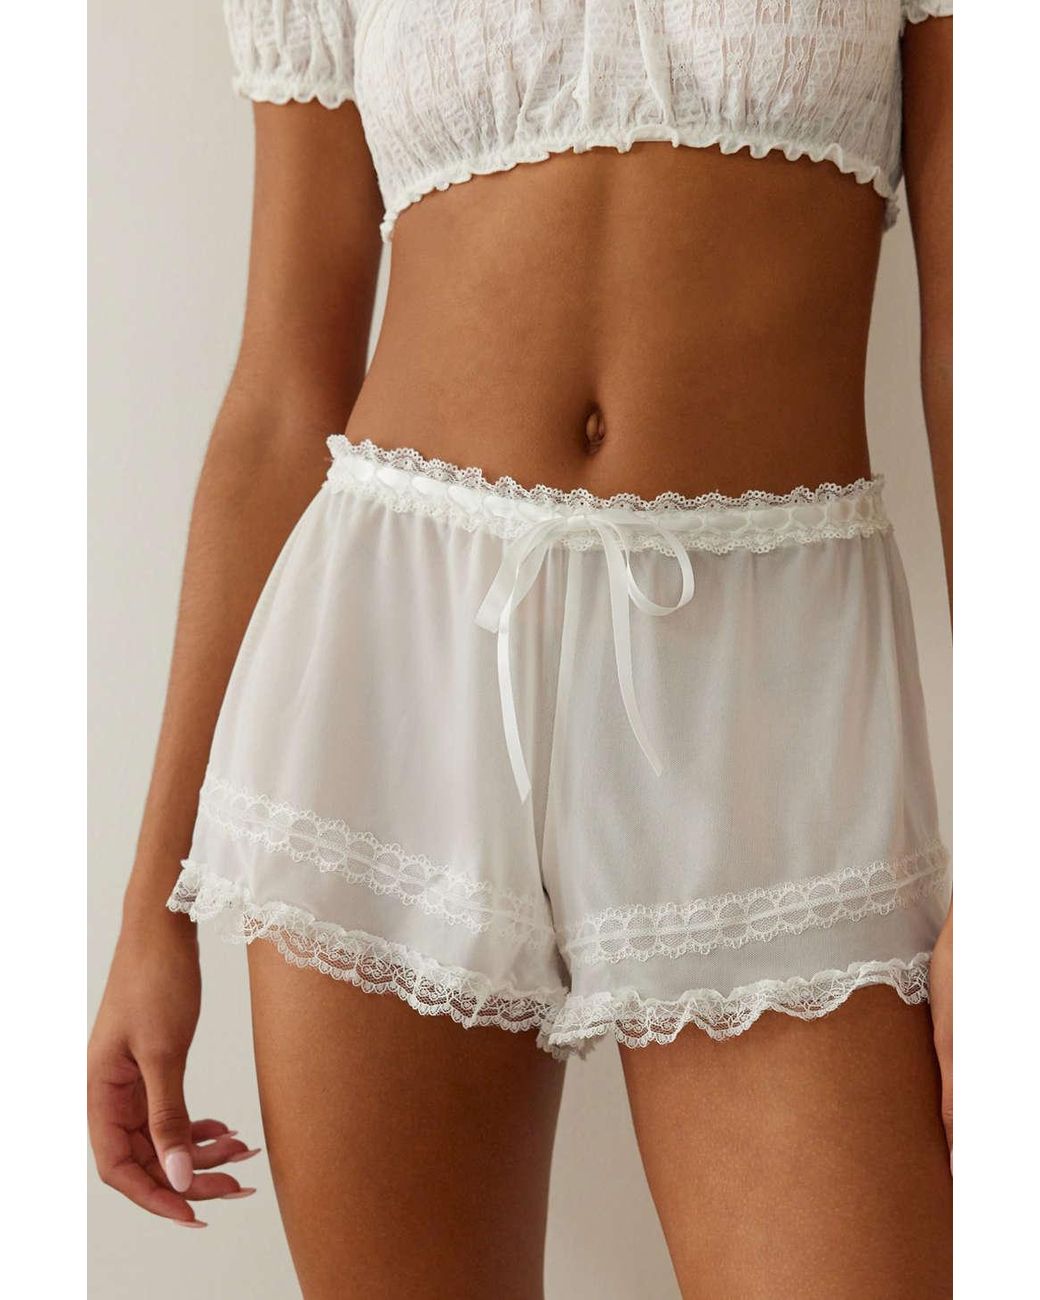 https://cdna.lystit.com/1040/1300/n/photos/urbanoutfitters/5324973d/out-from-under-Ivory-Jadore-Lace-trim-Short.jpeg